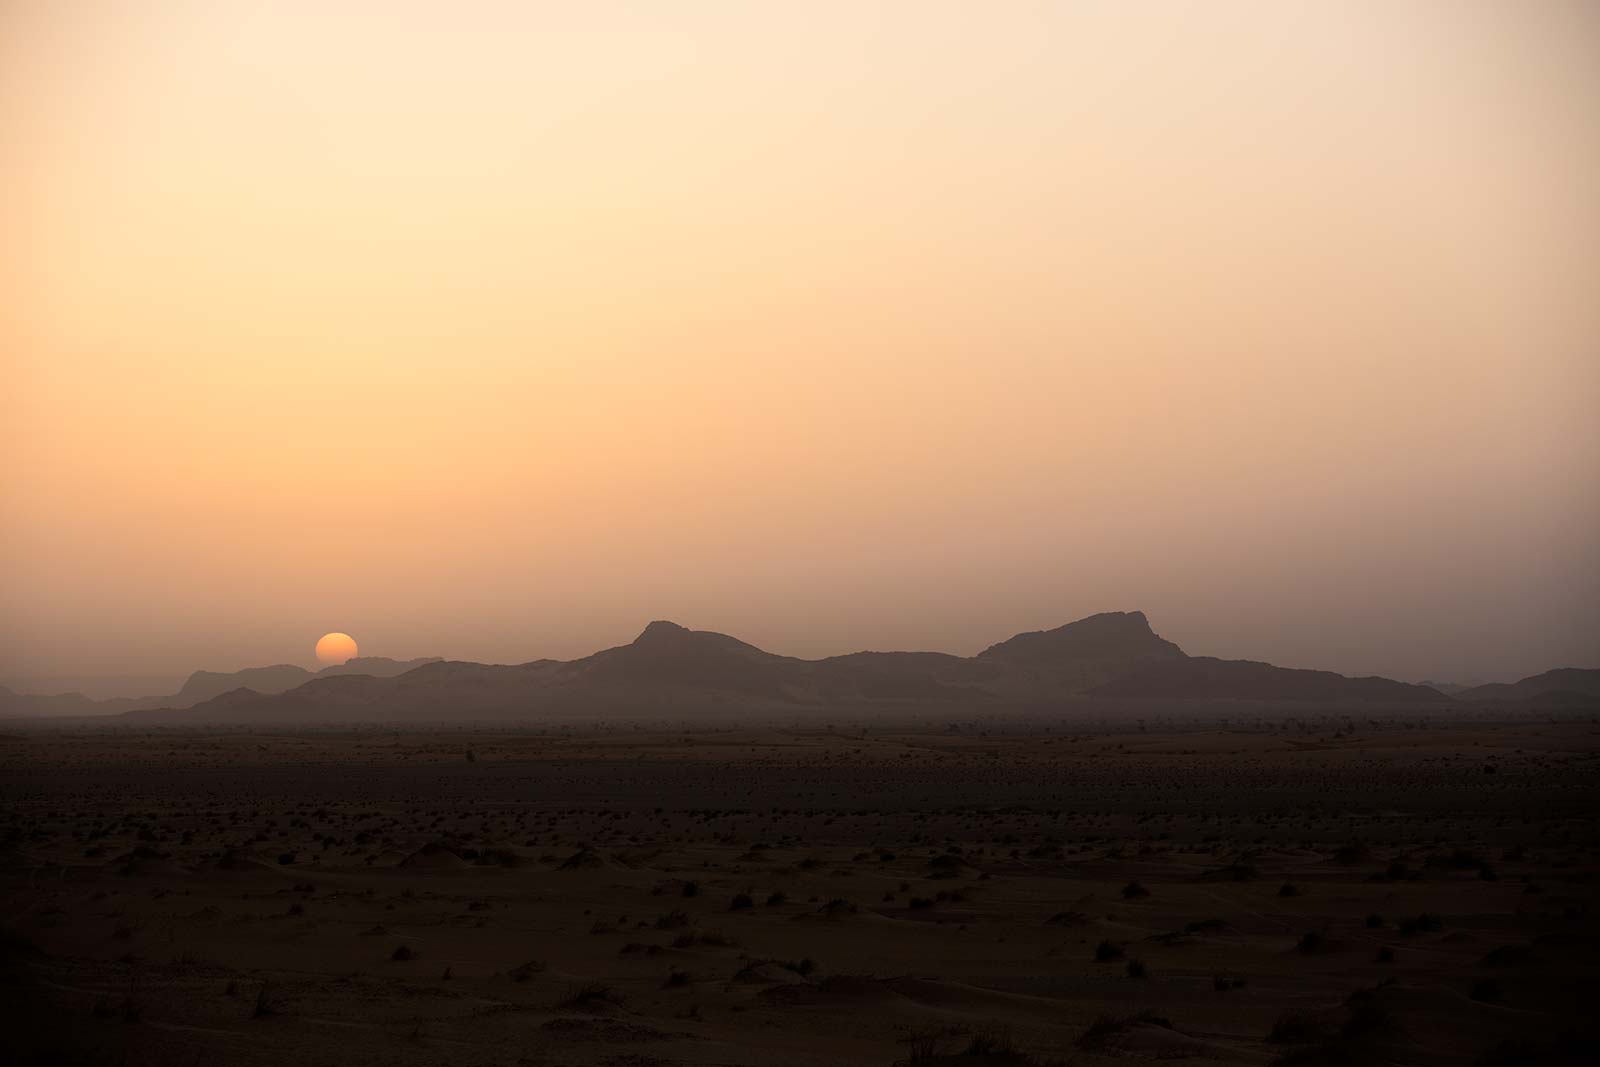 One thing is for sure: the sunset and sunrise while on the Iron Ore Train in Mauritania were some of the most beautiful ones I have ever encountered.